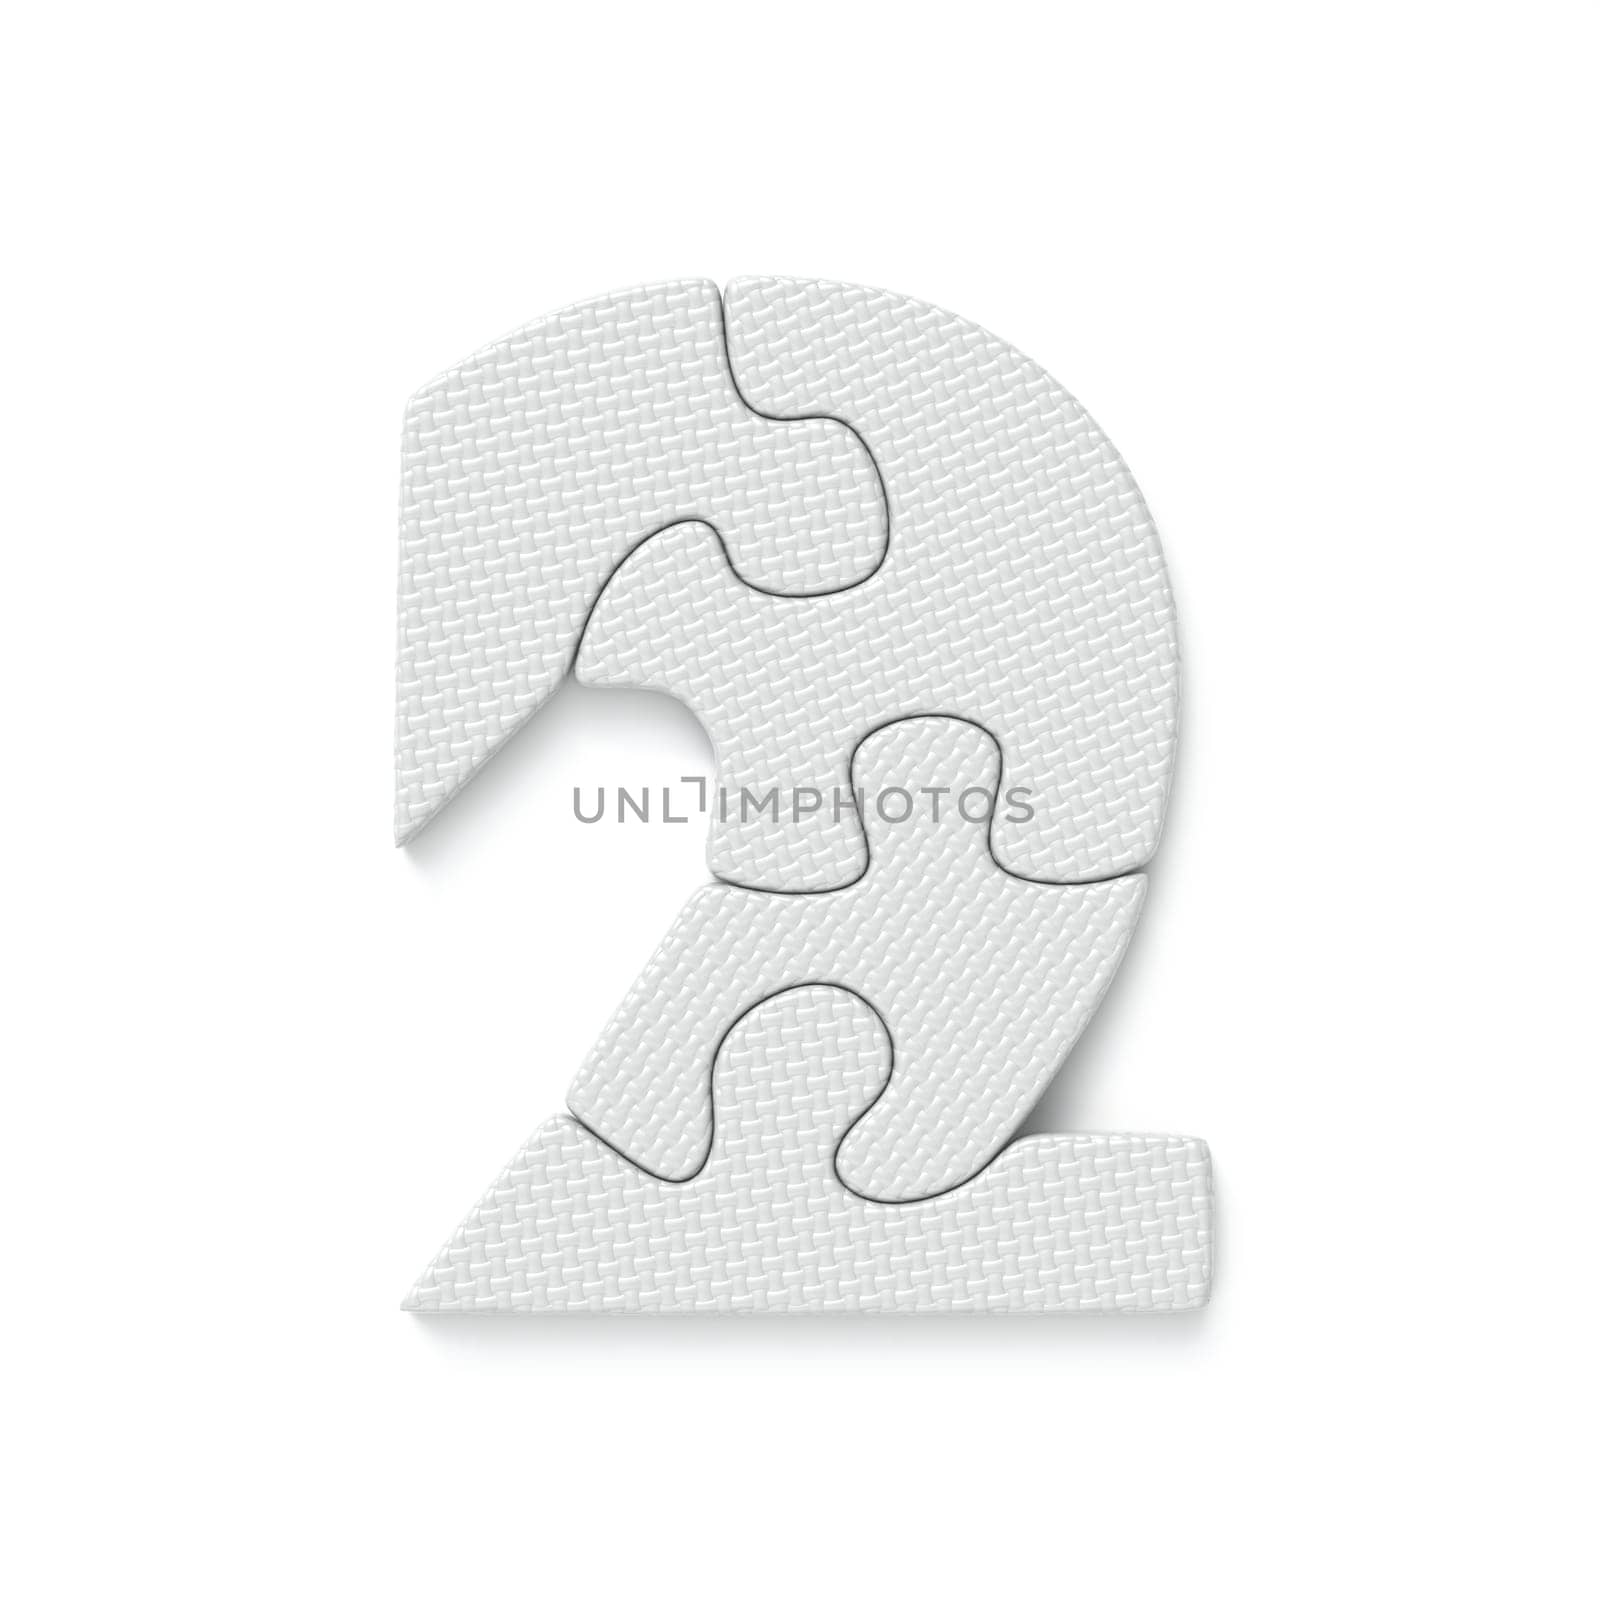 White jigsaw puzzle font Number 2 TWO 3D rendering illustration isolated on white background